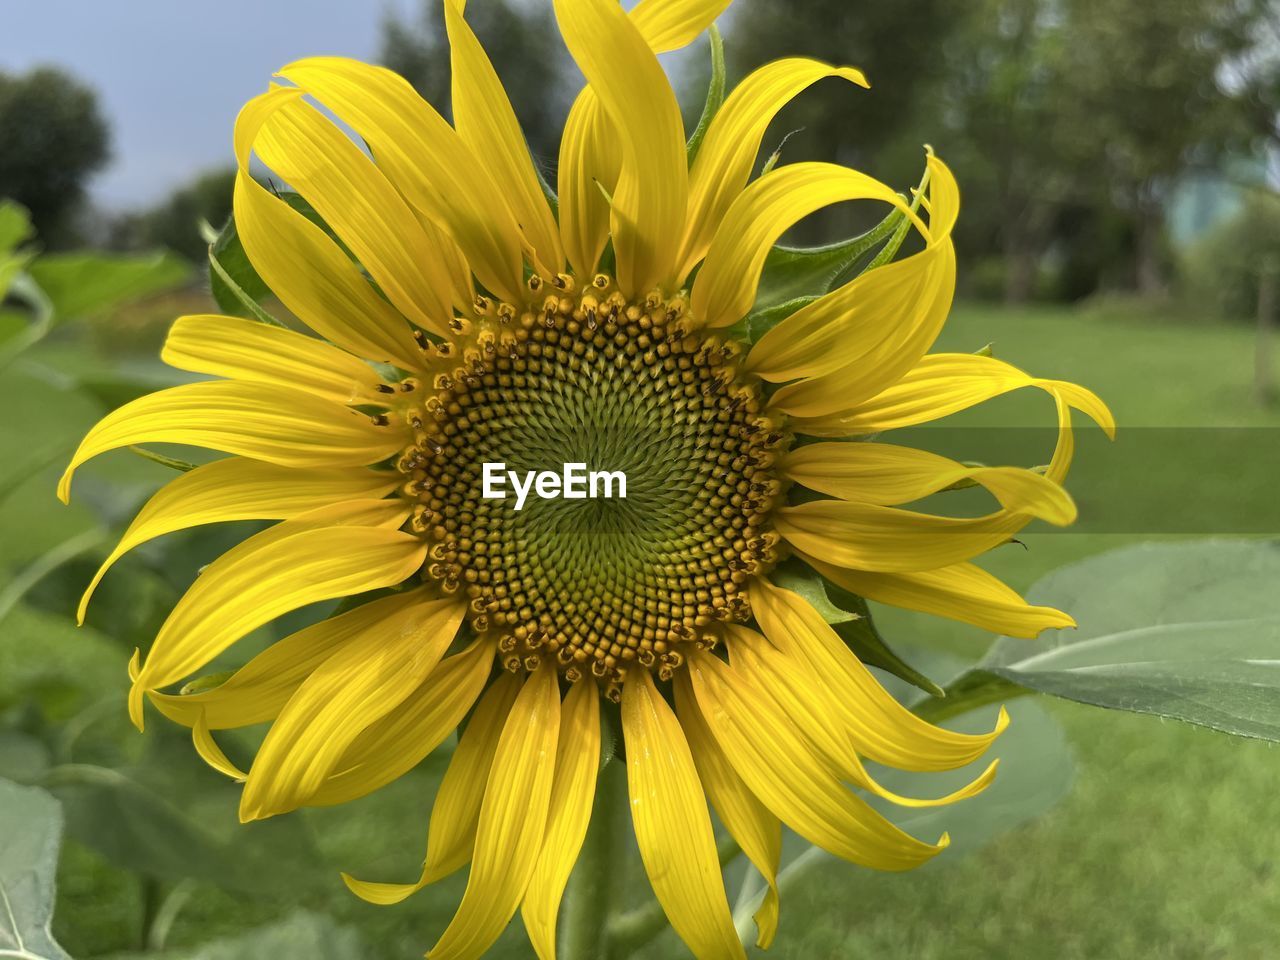 plant, flower, flowering plant, yellow, sunflower, beauty in nature, freshness, flower head, growth, petal, inflorescence, nature, close-up, fragility, pollen, field, focus on foreground, landscape, sky, rural scene, no people, springtime, asterales, outdoors, summer, sunflower seed, botany, day, land, blossom, seed, environment, agriculture, vibrant color, green